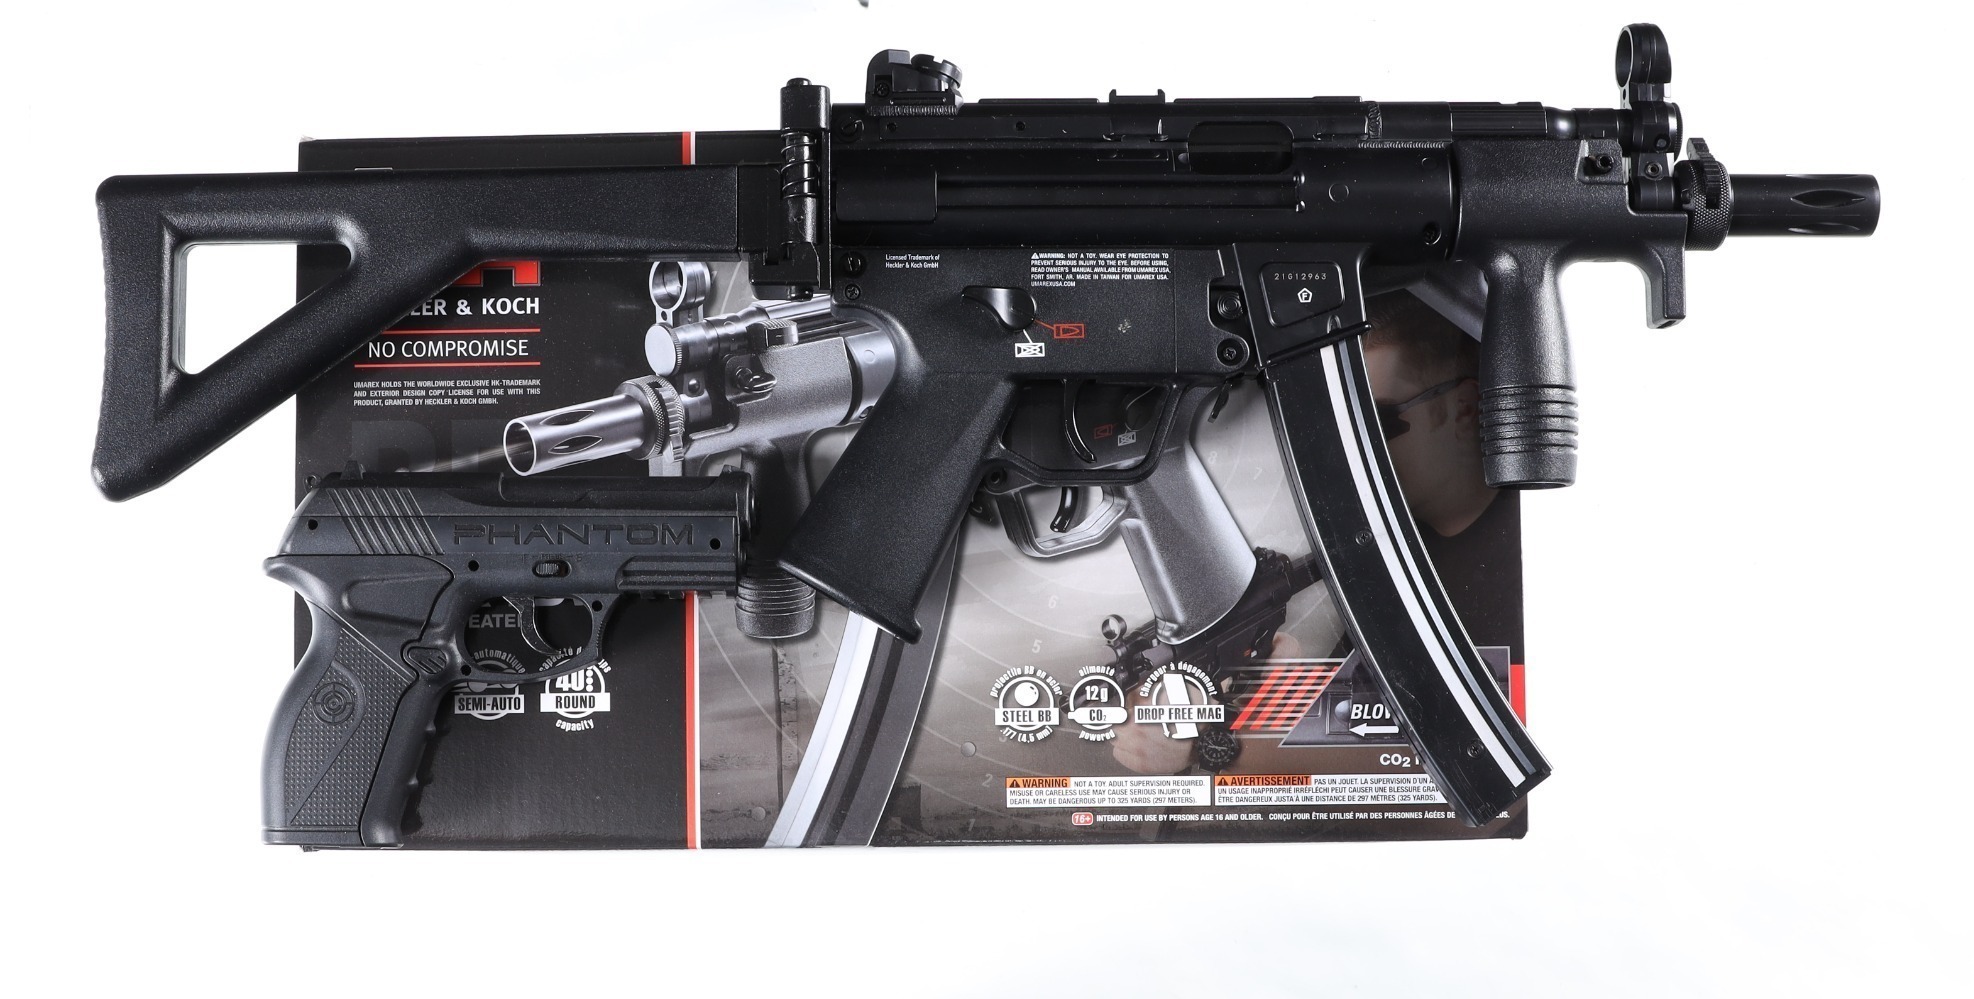 HK MP5K Air Rifle and pistol